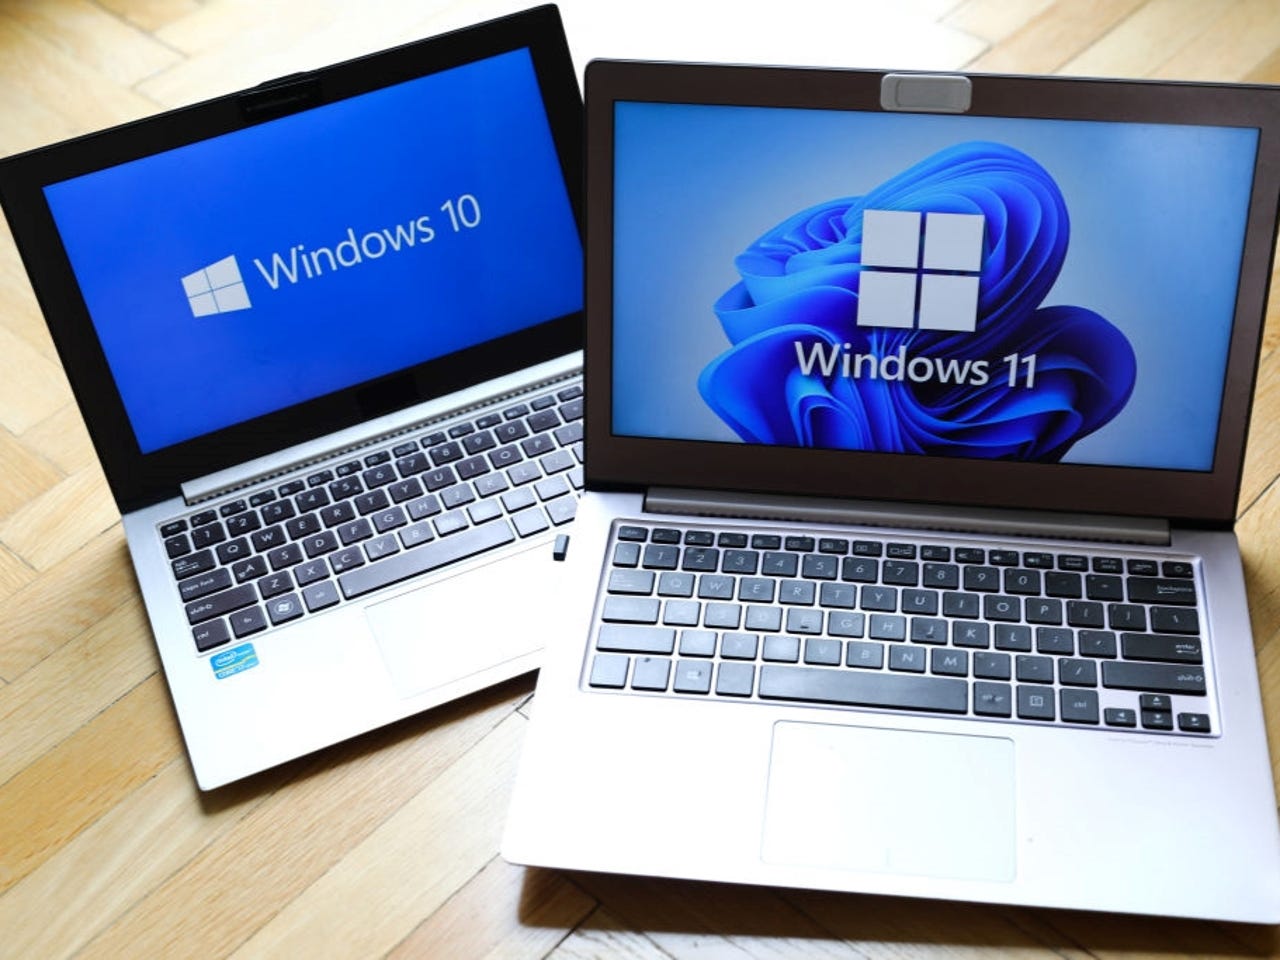 two laptop computers side by side, one displaying a blue background with a white windows 10 logo and the second with a patterned blue background displaying a windows 11 logo